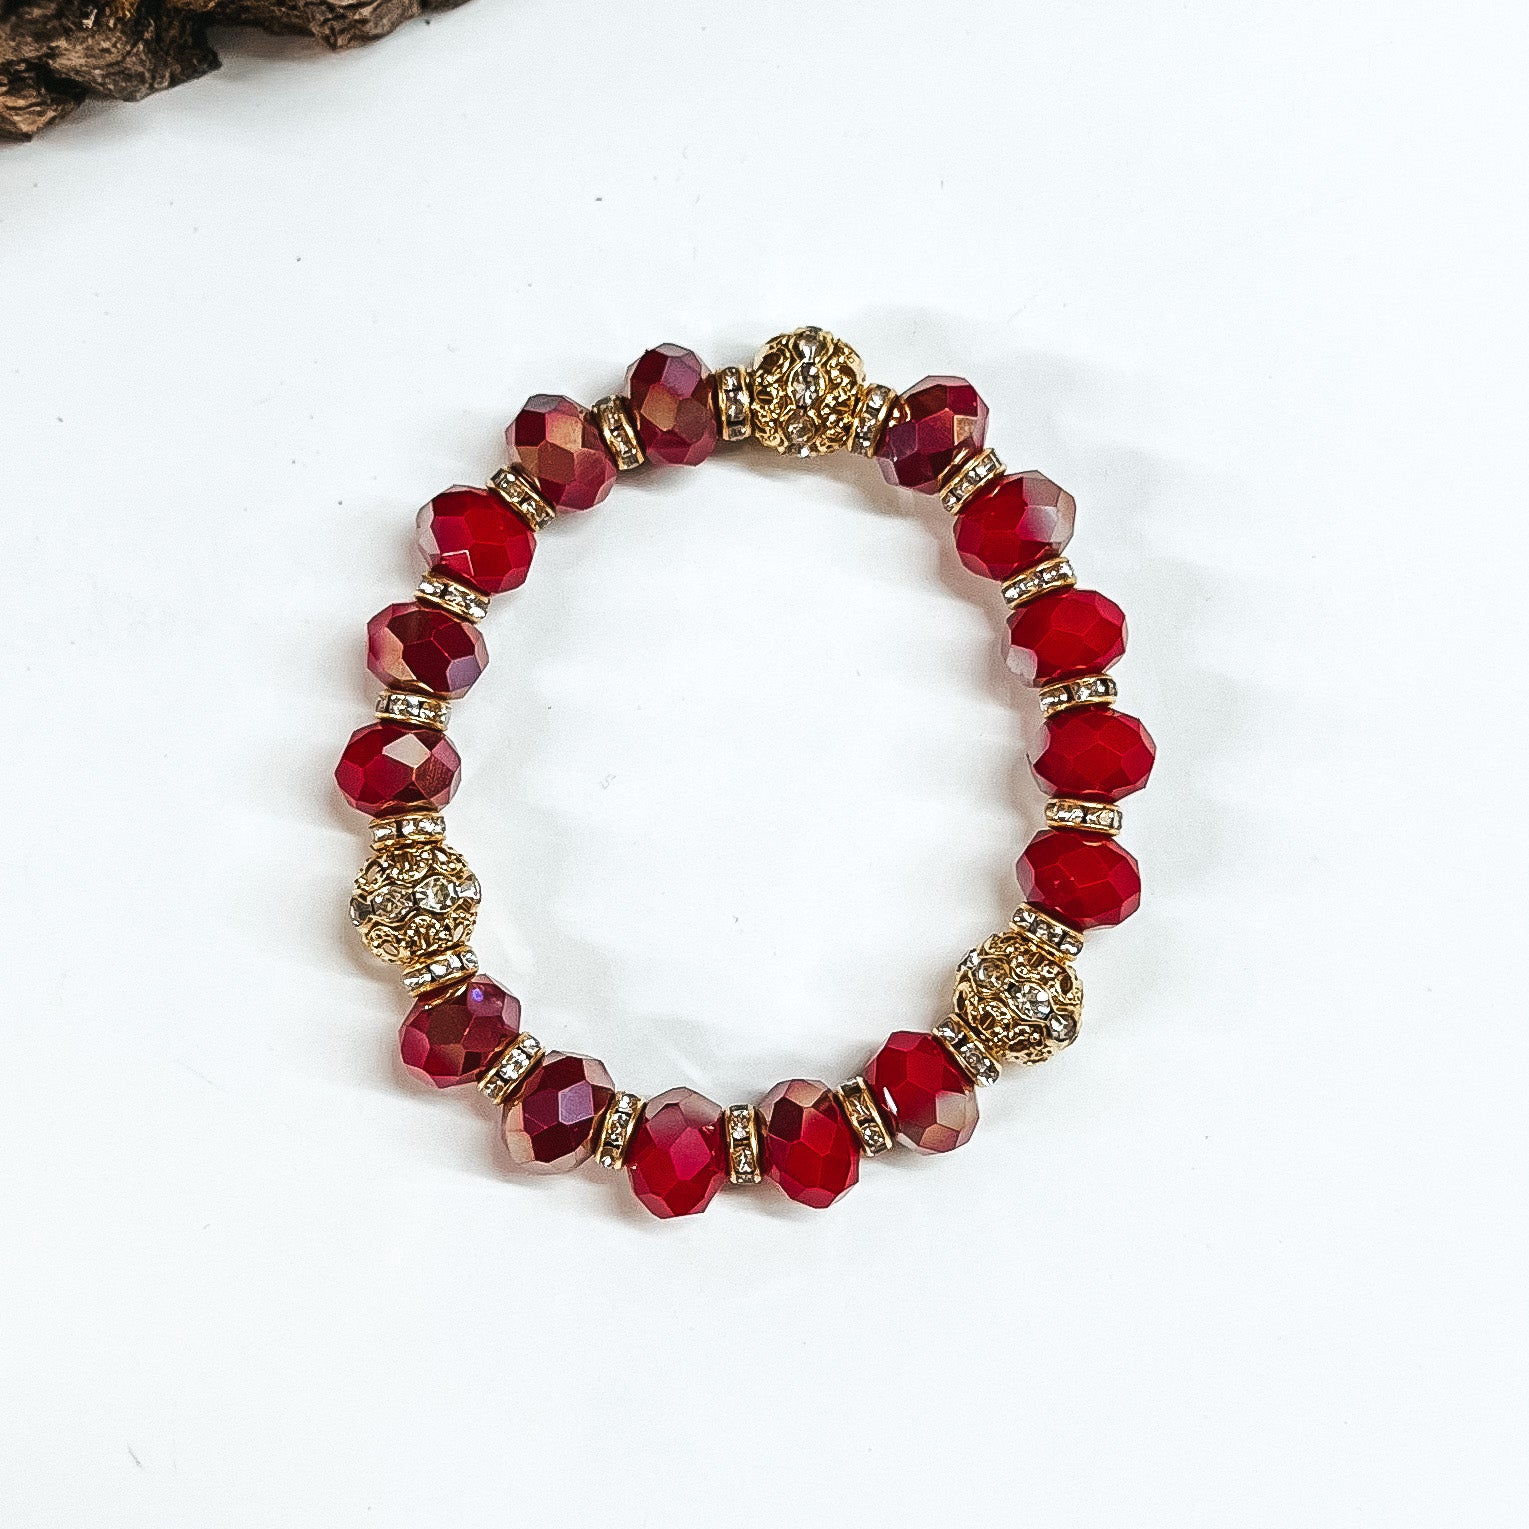 This is red/maroon mix crystal beaded bracelets with gold spacers.  The gold spacers have clear crystals in them and there are three gold and  crystals beads.This bracelet is taken on white background.